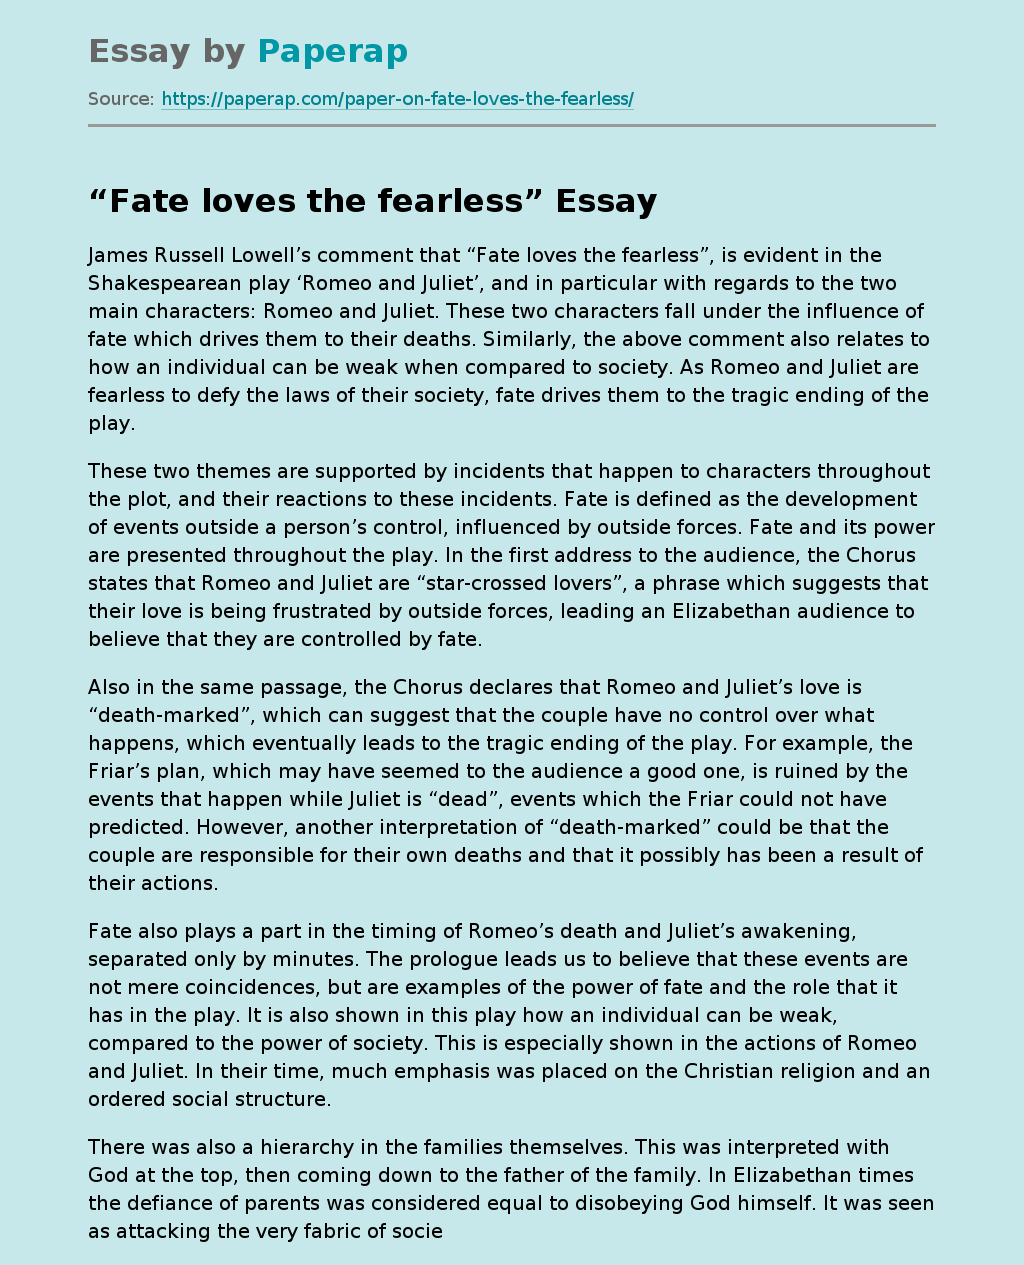 “Fate loves the fearless”